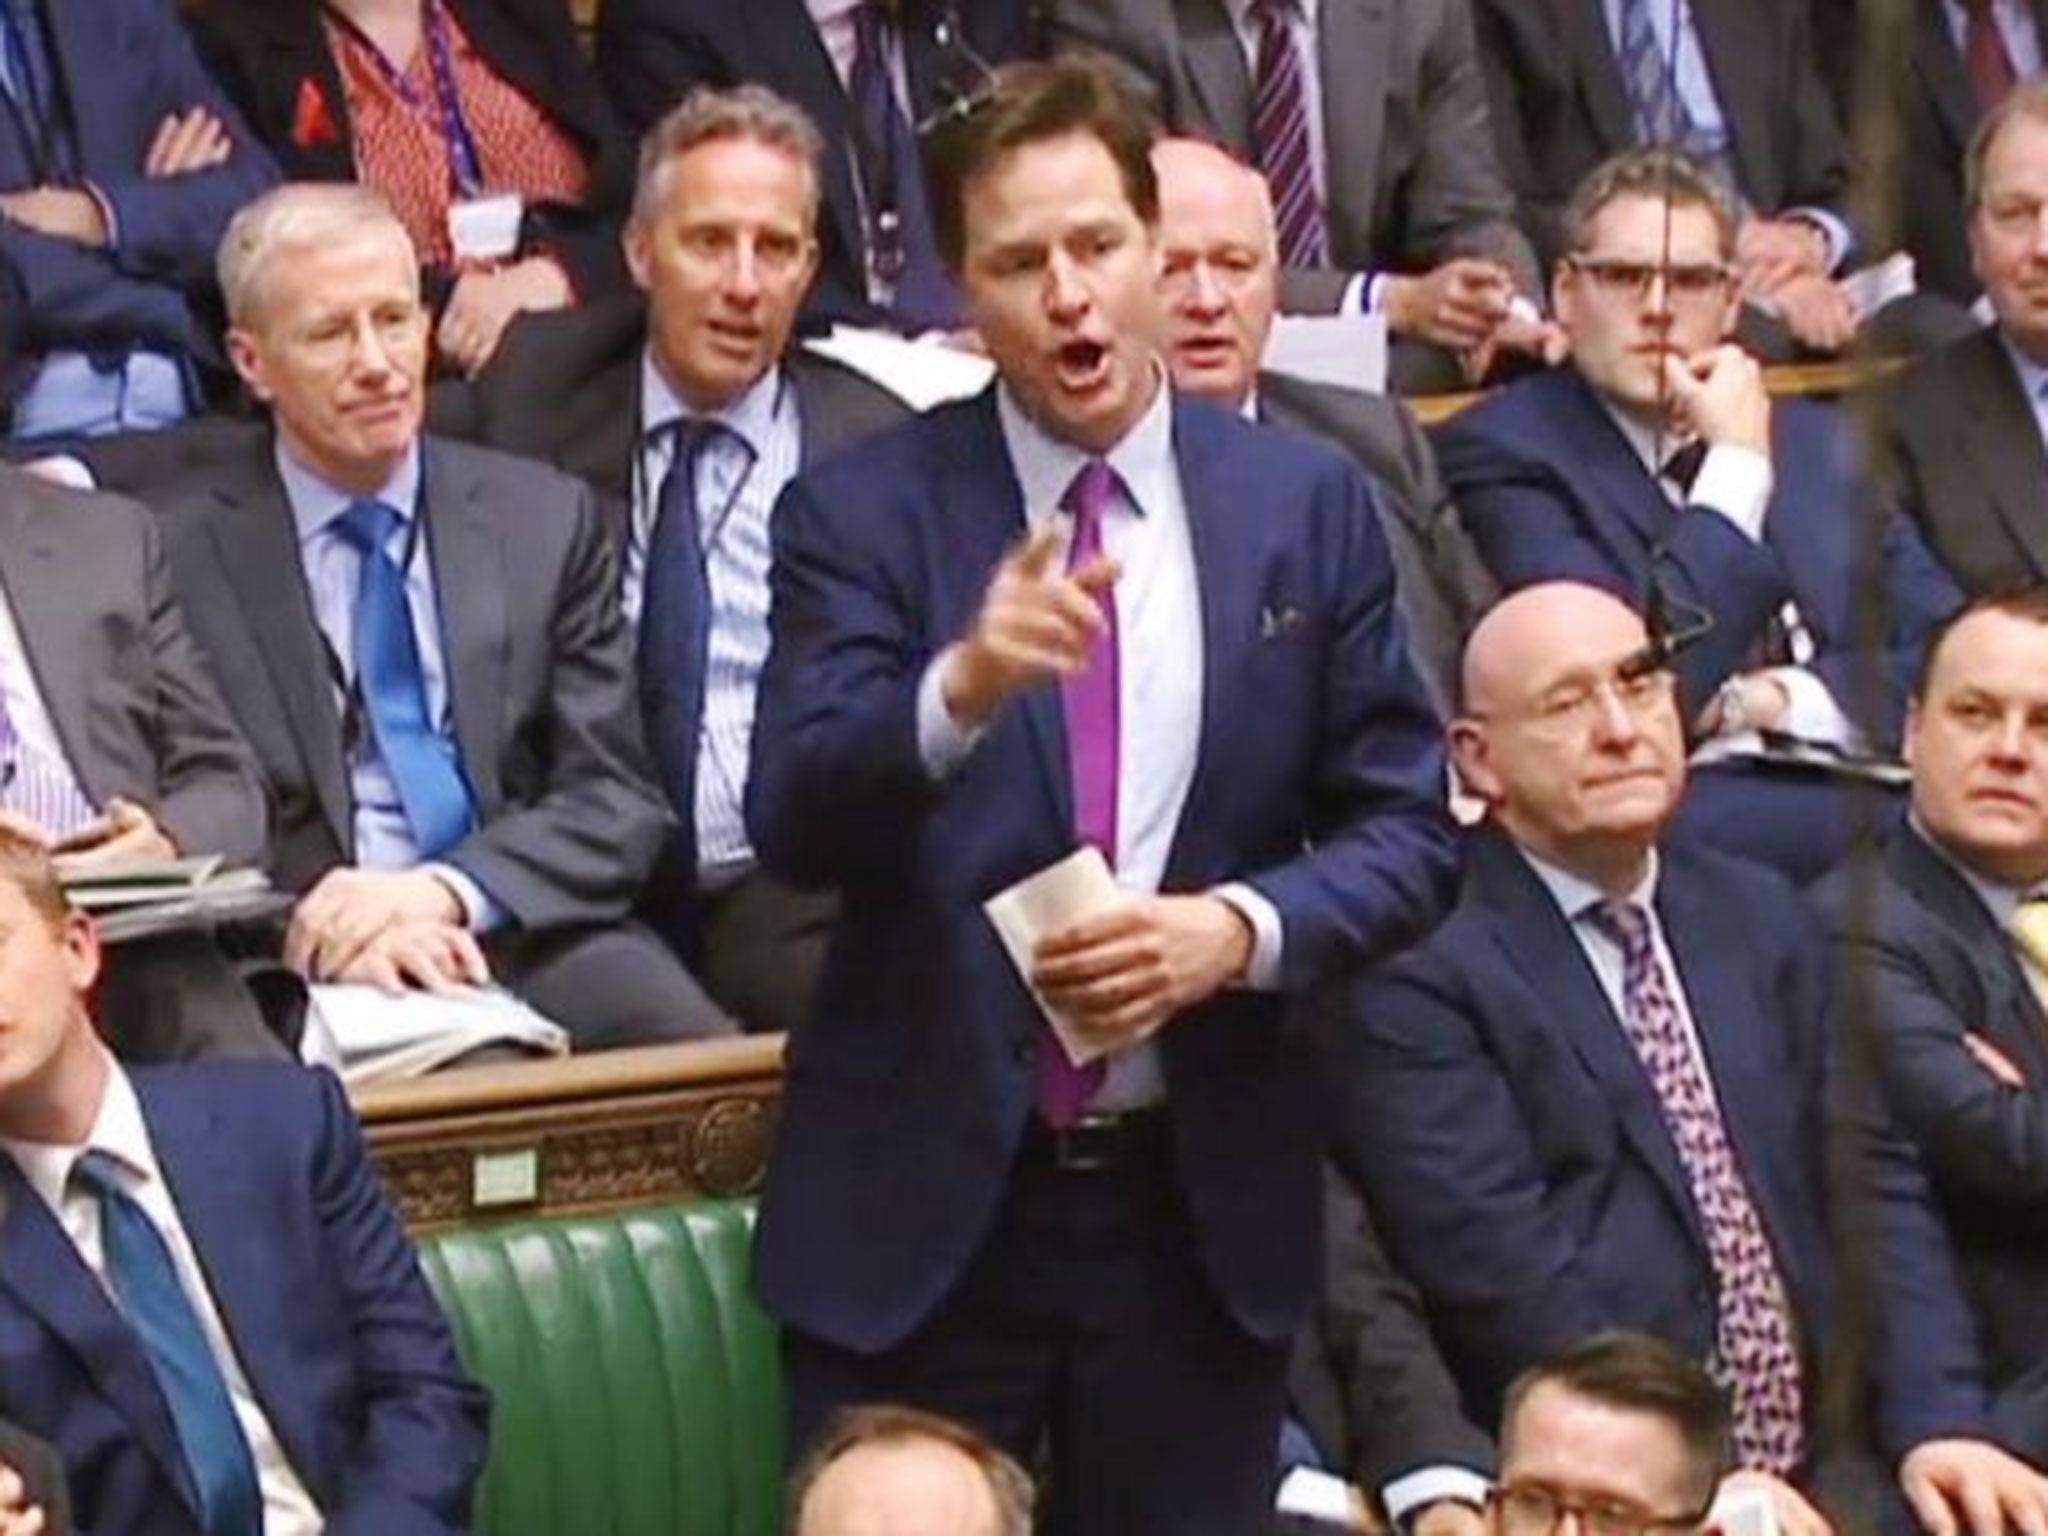 &#13;
In relation to the EU debate, Nick Clegg said: “This referendum is about the future of our country, it’s not about the future of a divided Conservative party” &#13;